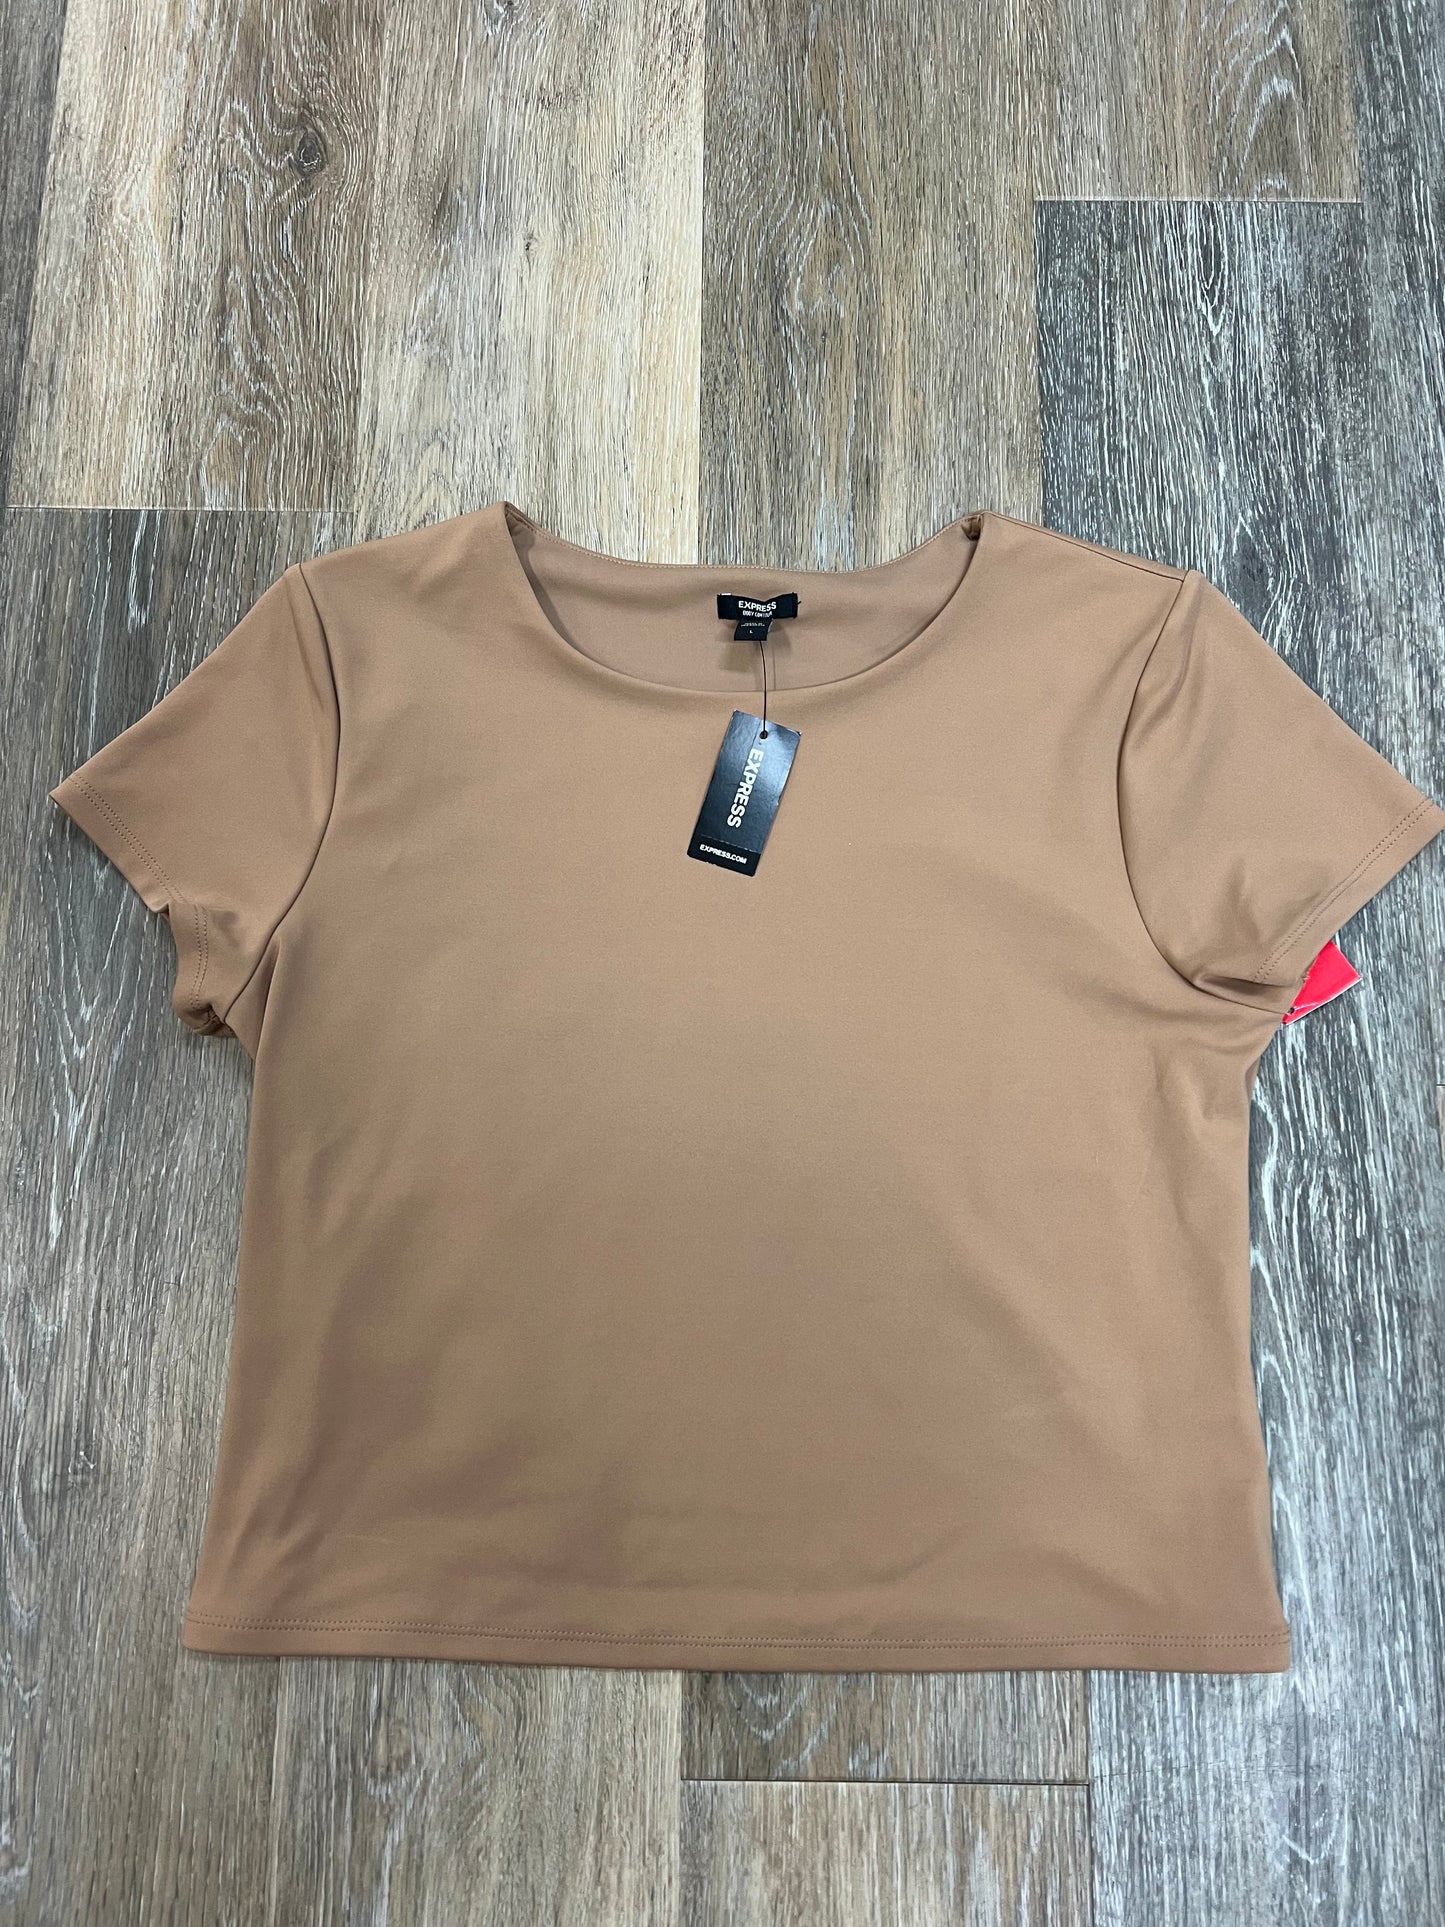 Brown Top Short Sleeve Express, Size L